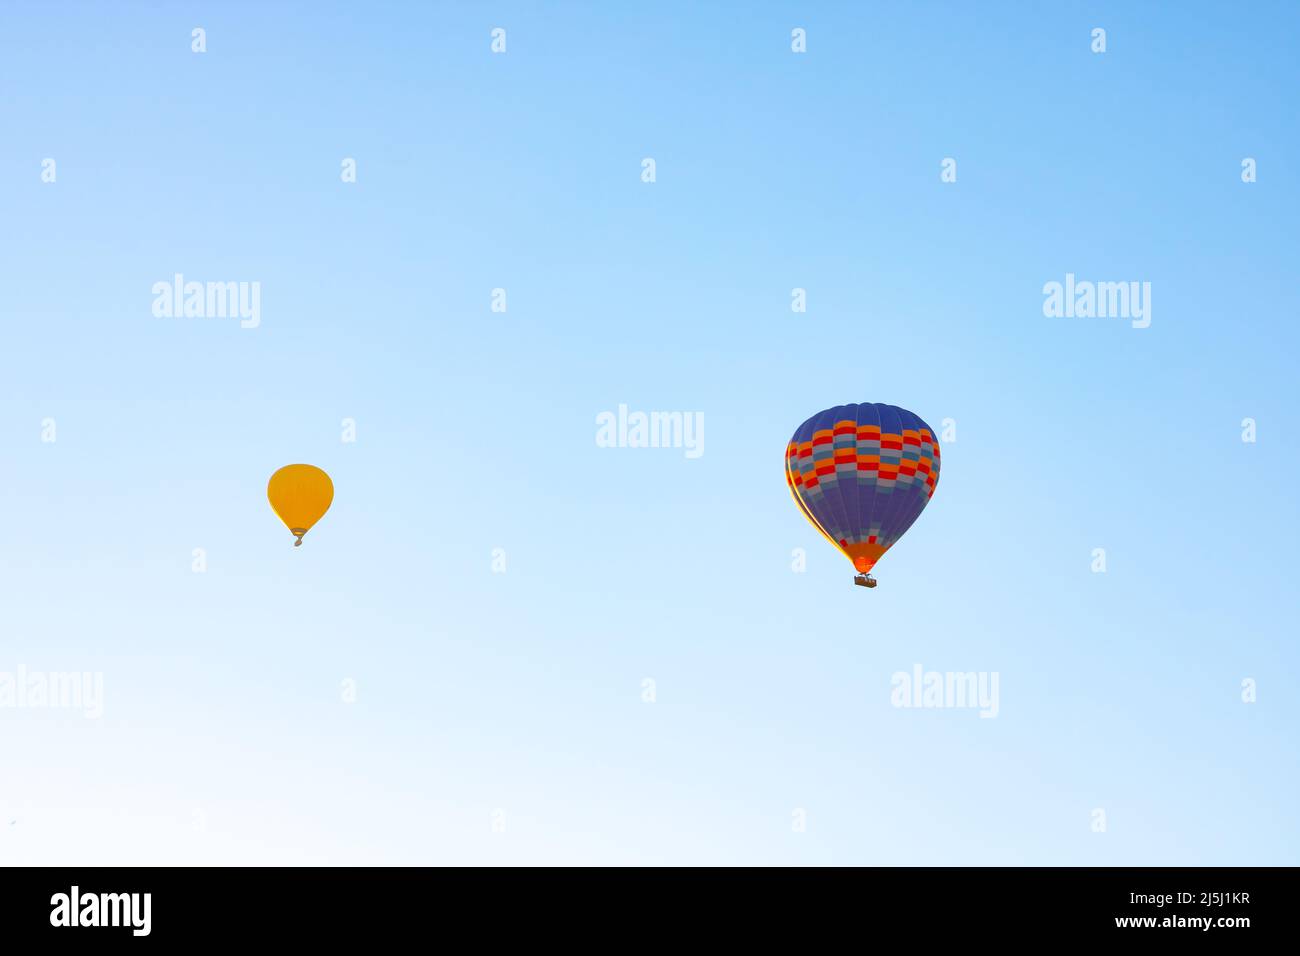 Two hot air balloons on the sky. Ballooning activity background photo. Hot air balloon festival concept. Stock Photo